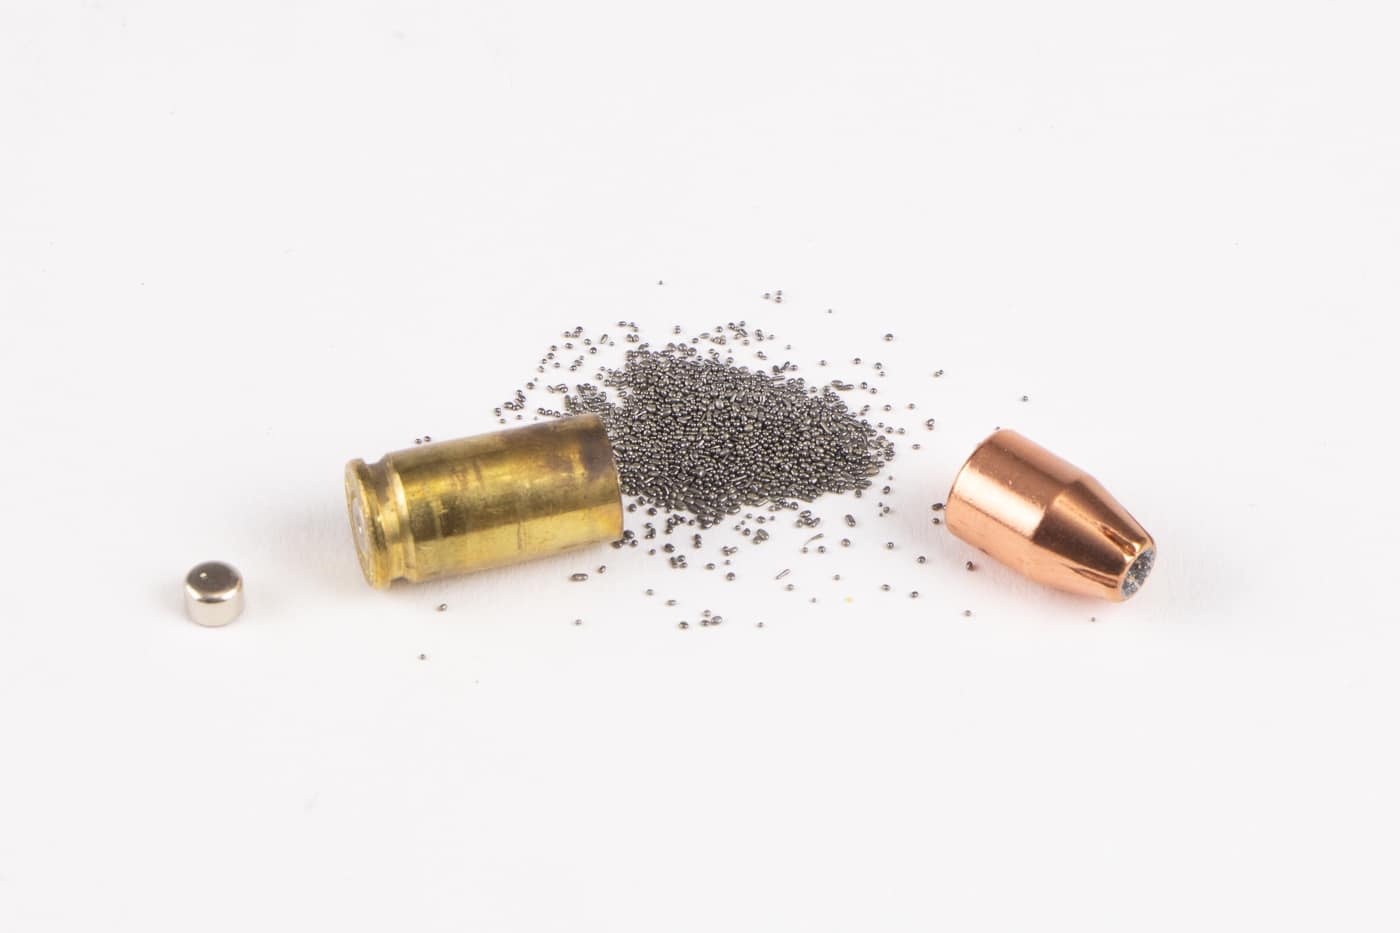 Here we see the various parts of a centerfire pistol cartridge. The bullet is a Hornady XTP hollow point bullet, ball smokeless powder, a brass case and a Boxer small pistol primer.